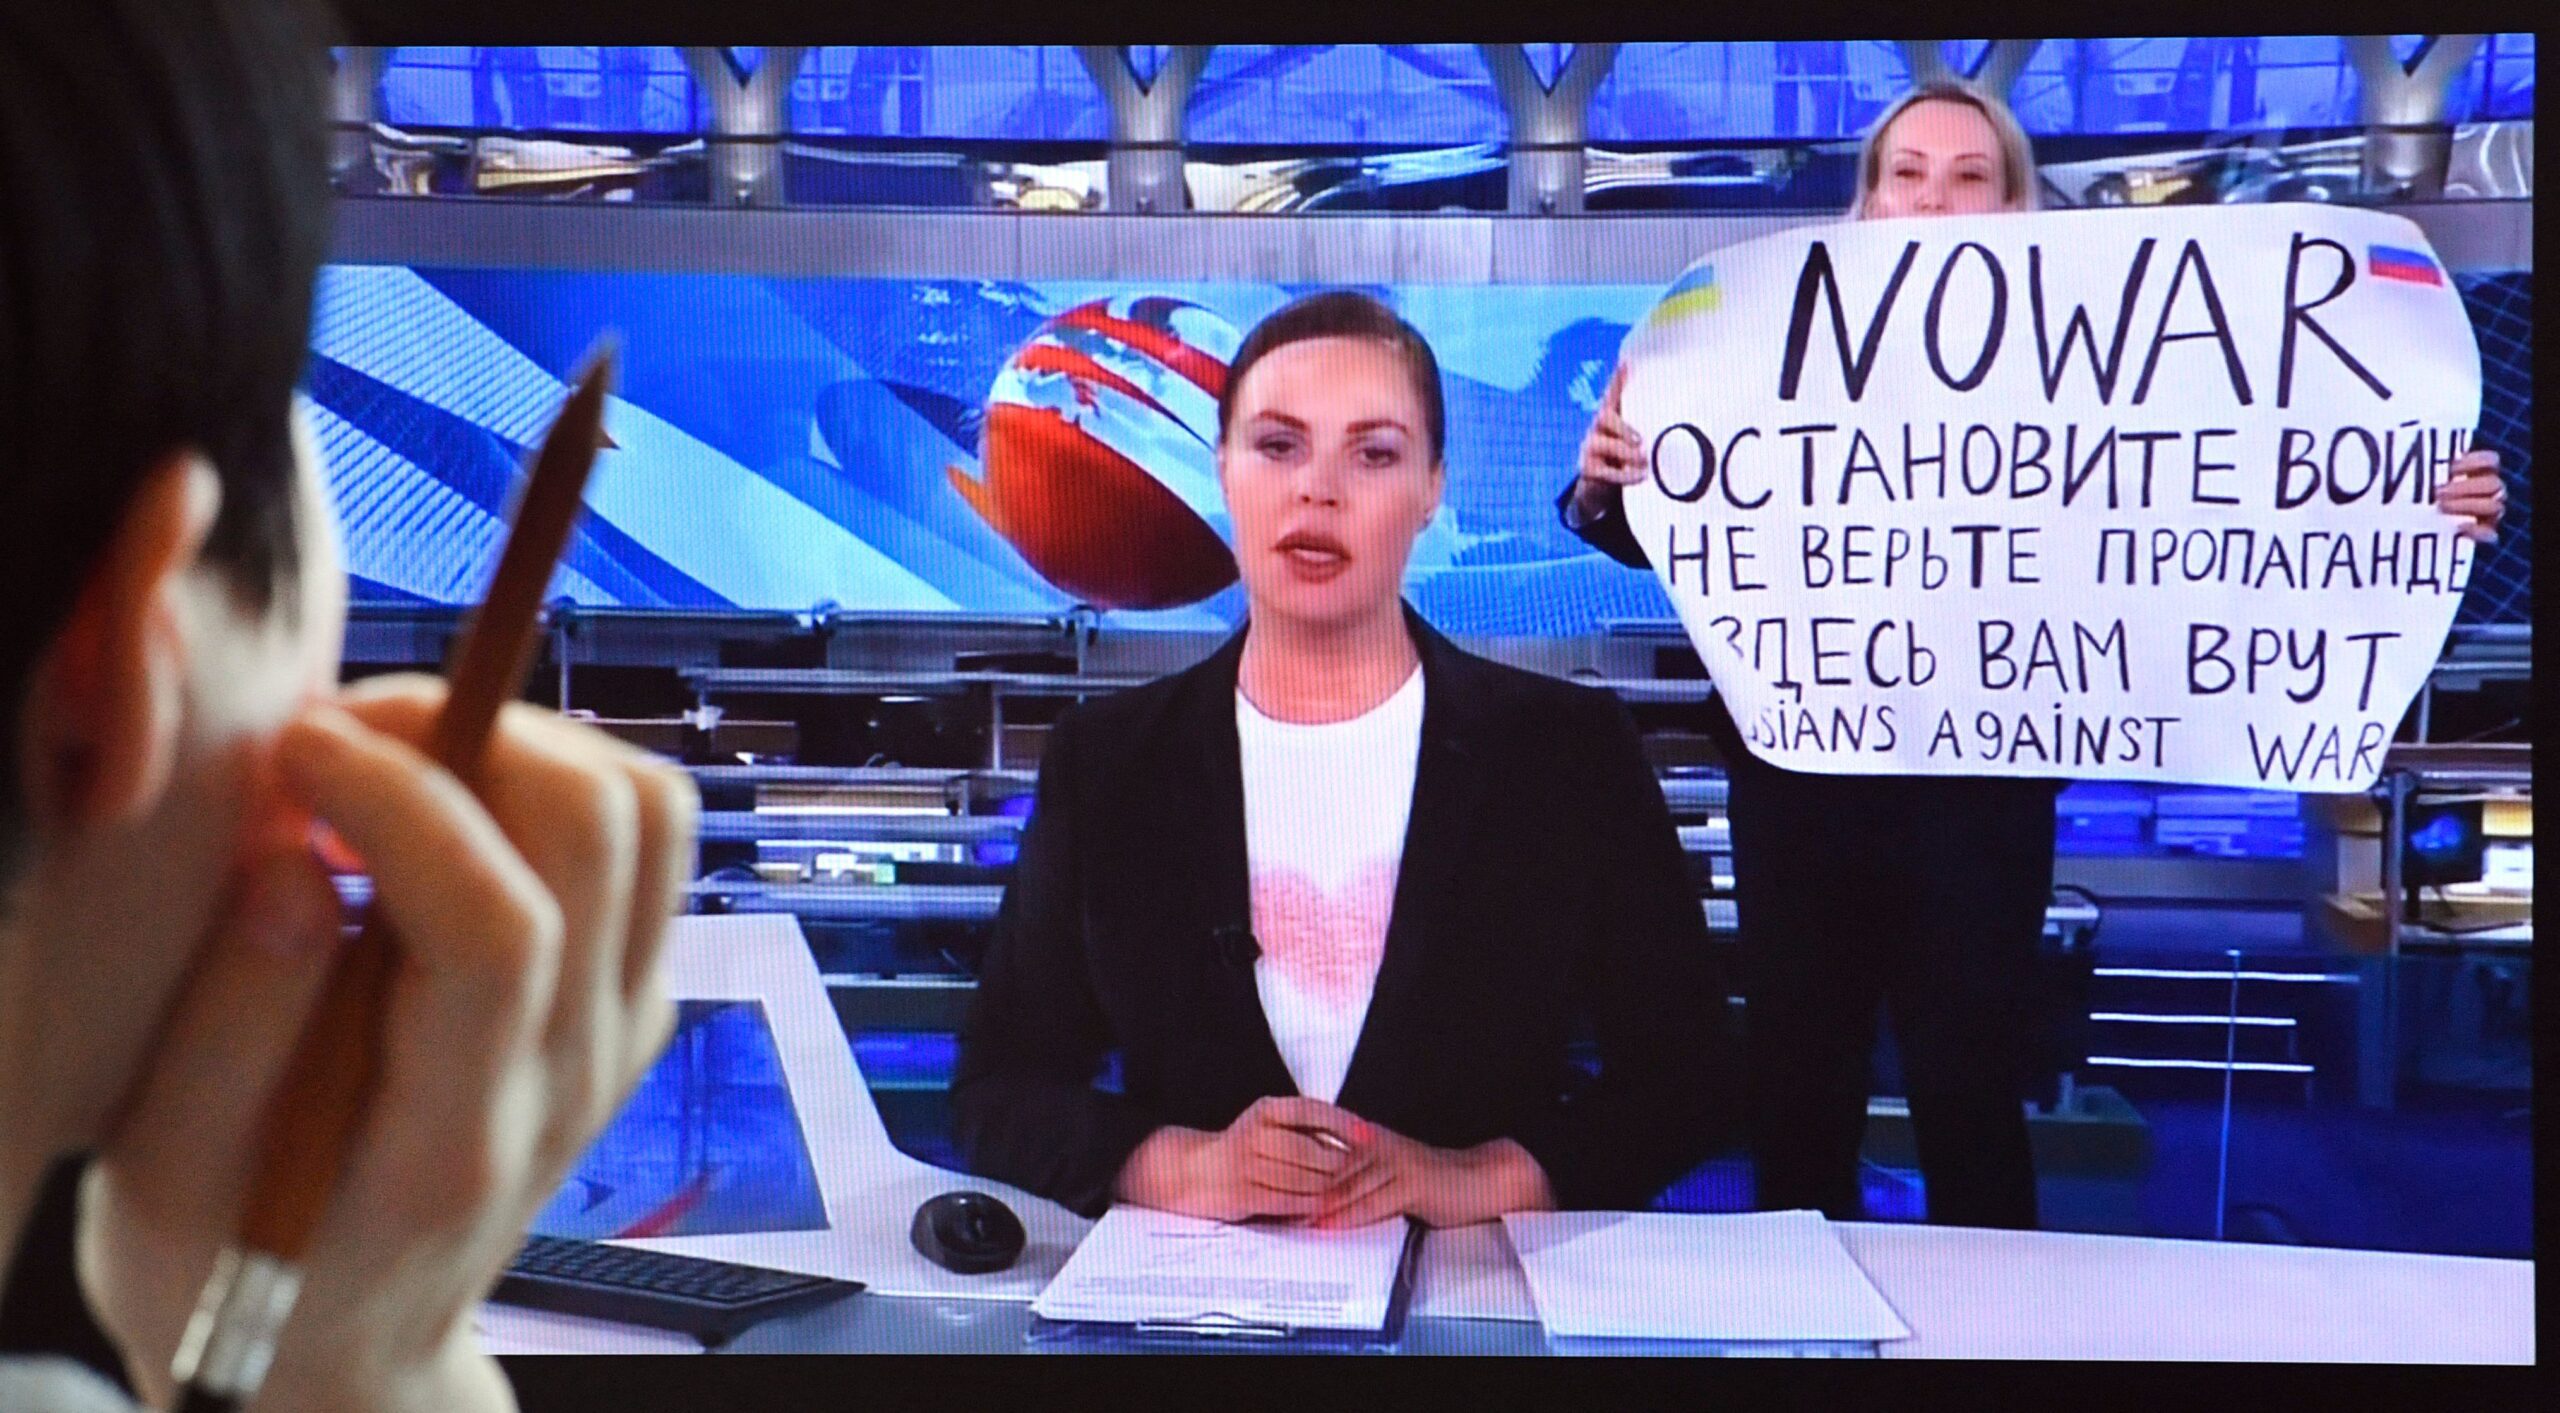 lawyer-says-russian-tv-protester-’not-scared‘-as-she-faces-criminal-charges-for-interrupting-broadcast